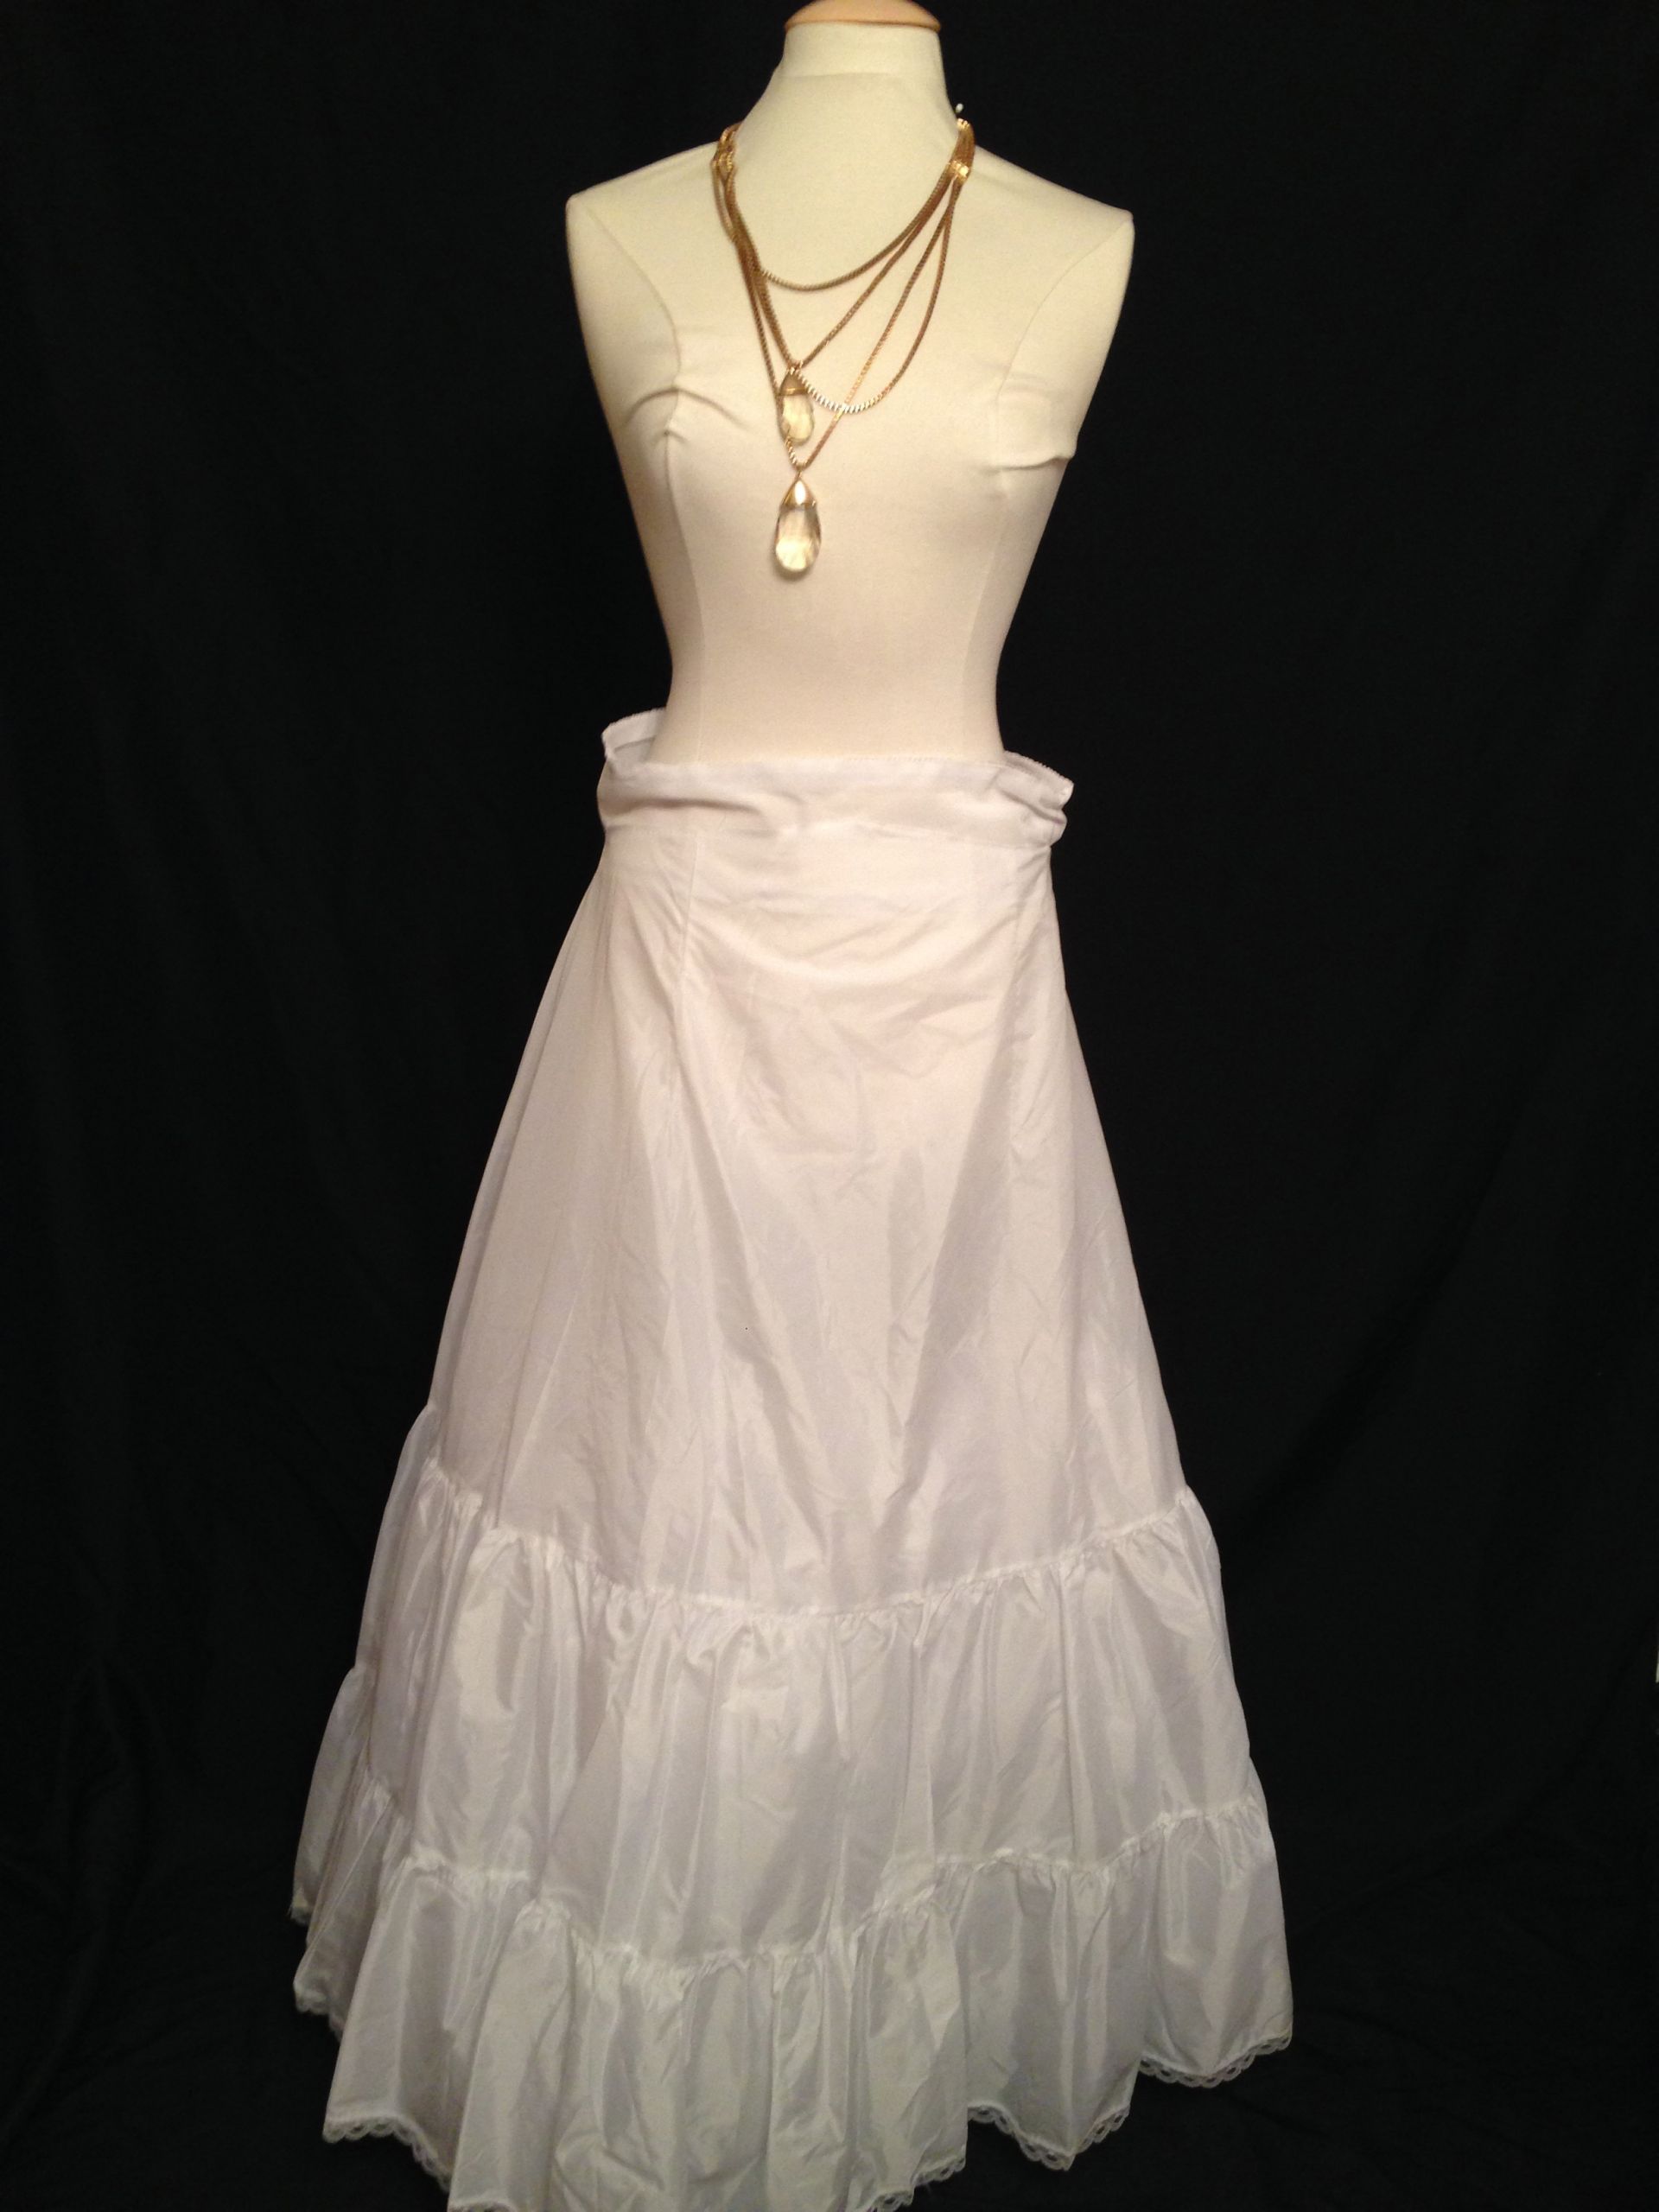 Wedding Dresses Knoxville Tn
 e stop shop for Wedding Dress Consignment in Knoxville